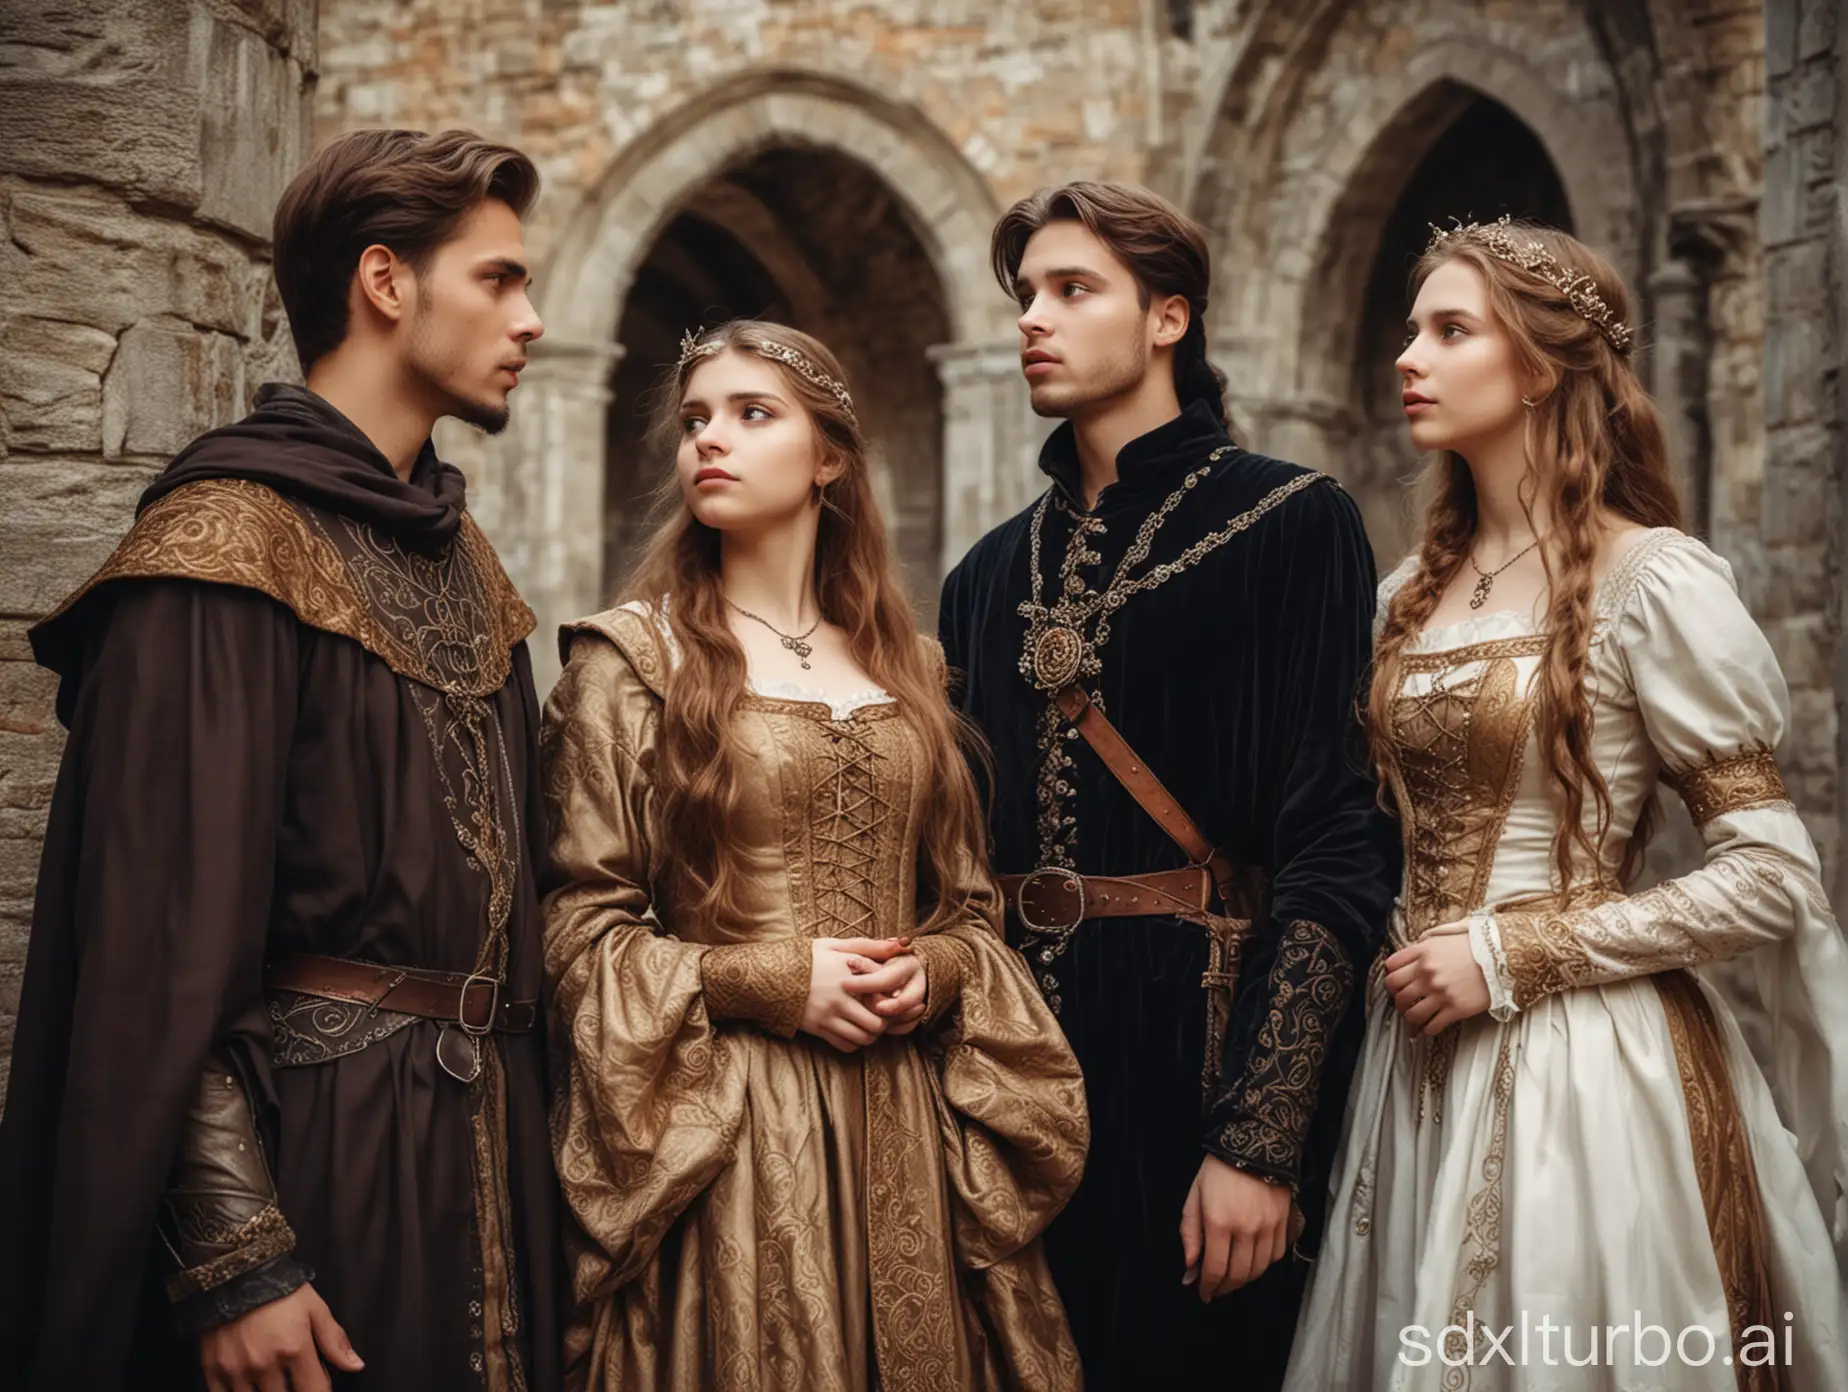 Two girls and a guy look somewhere with amazed. All dressed in rich medieval fantasy style,